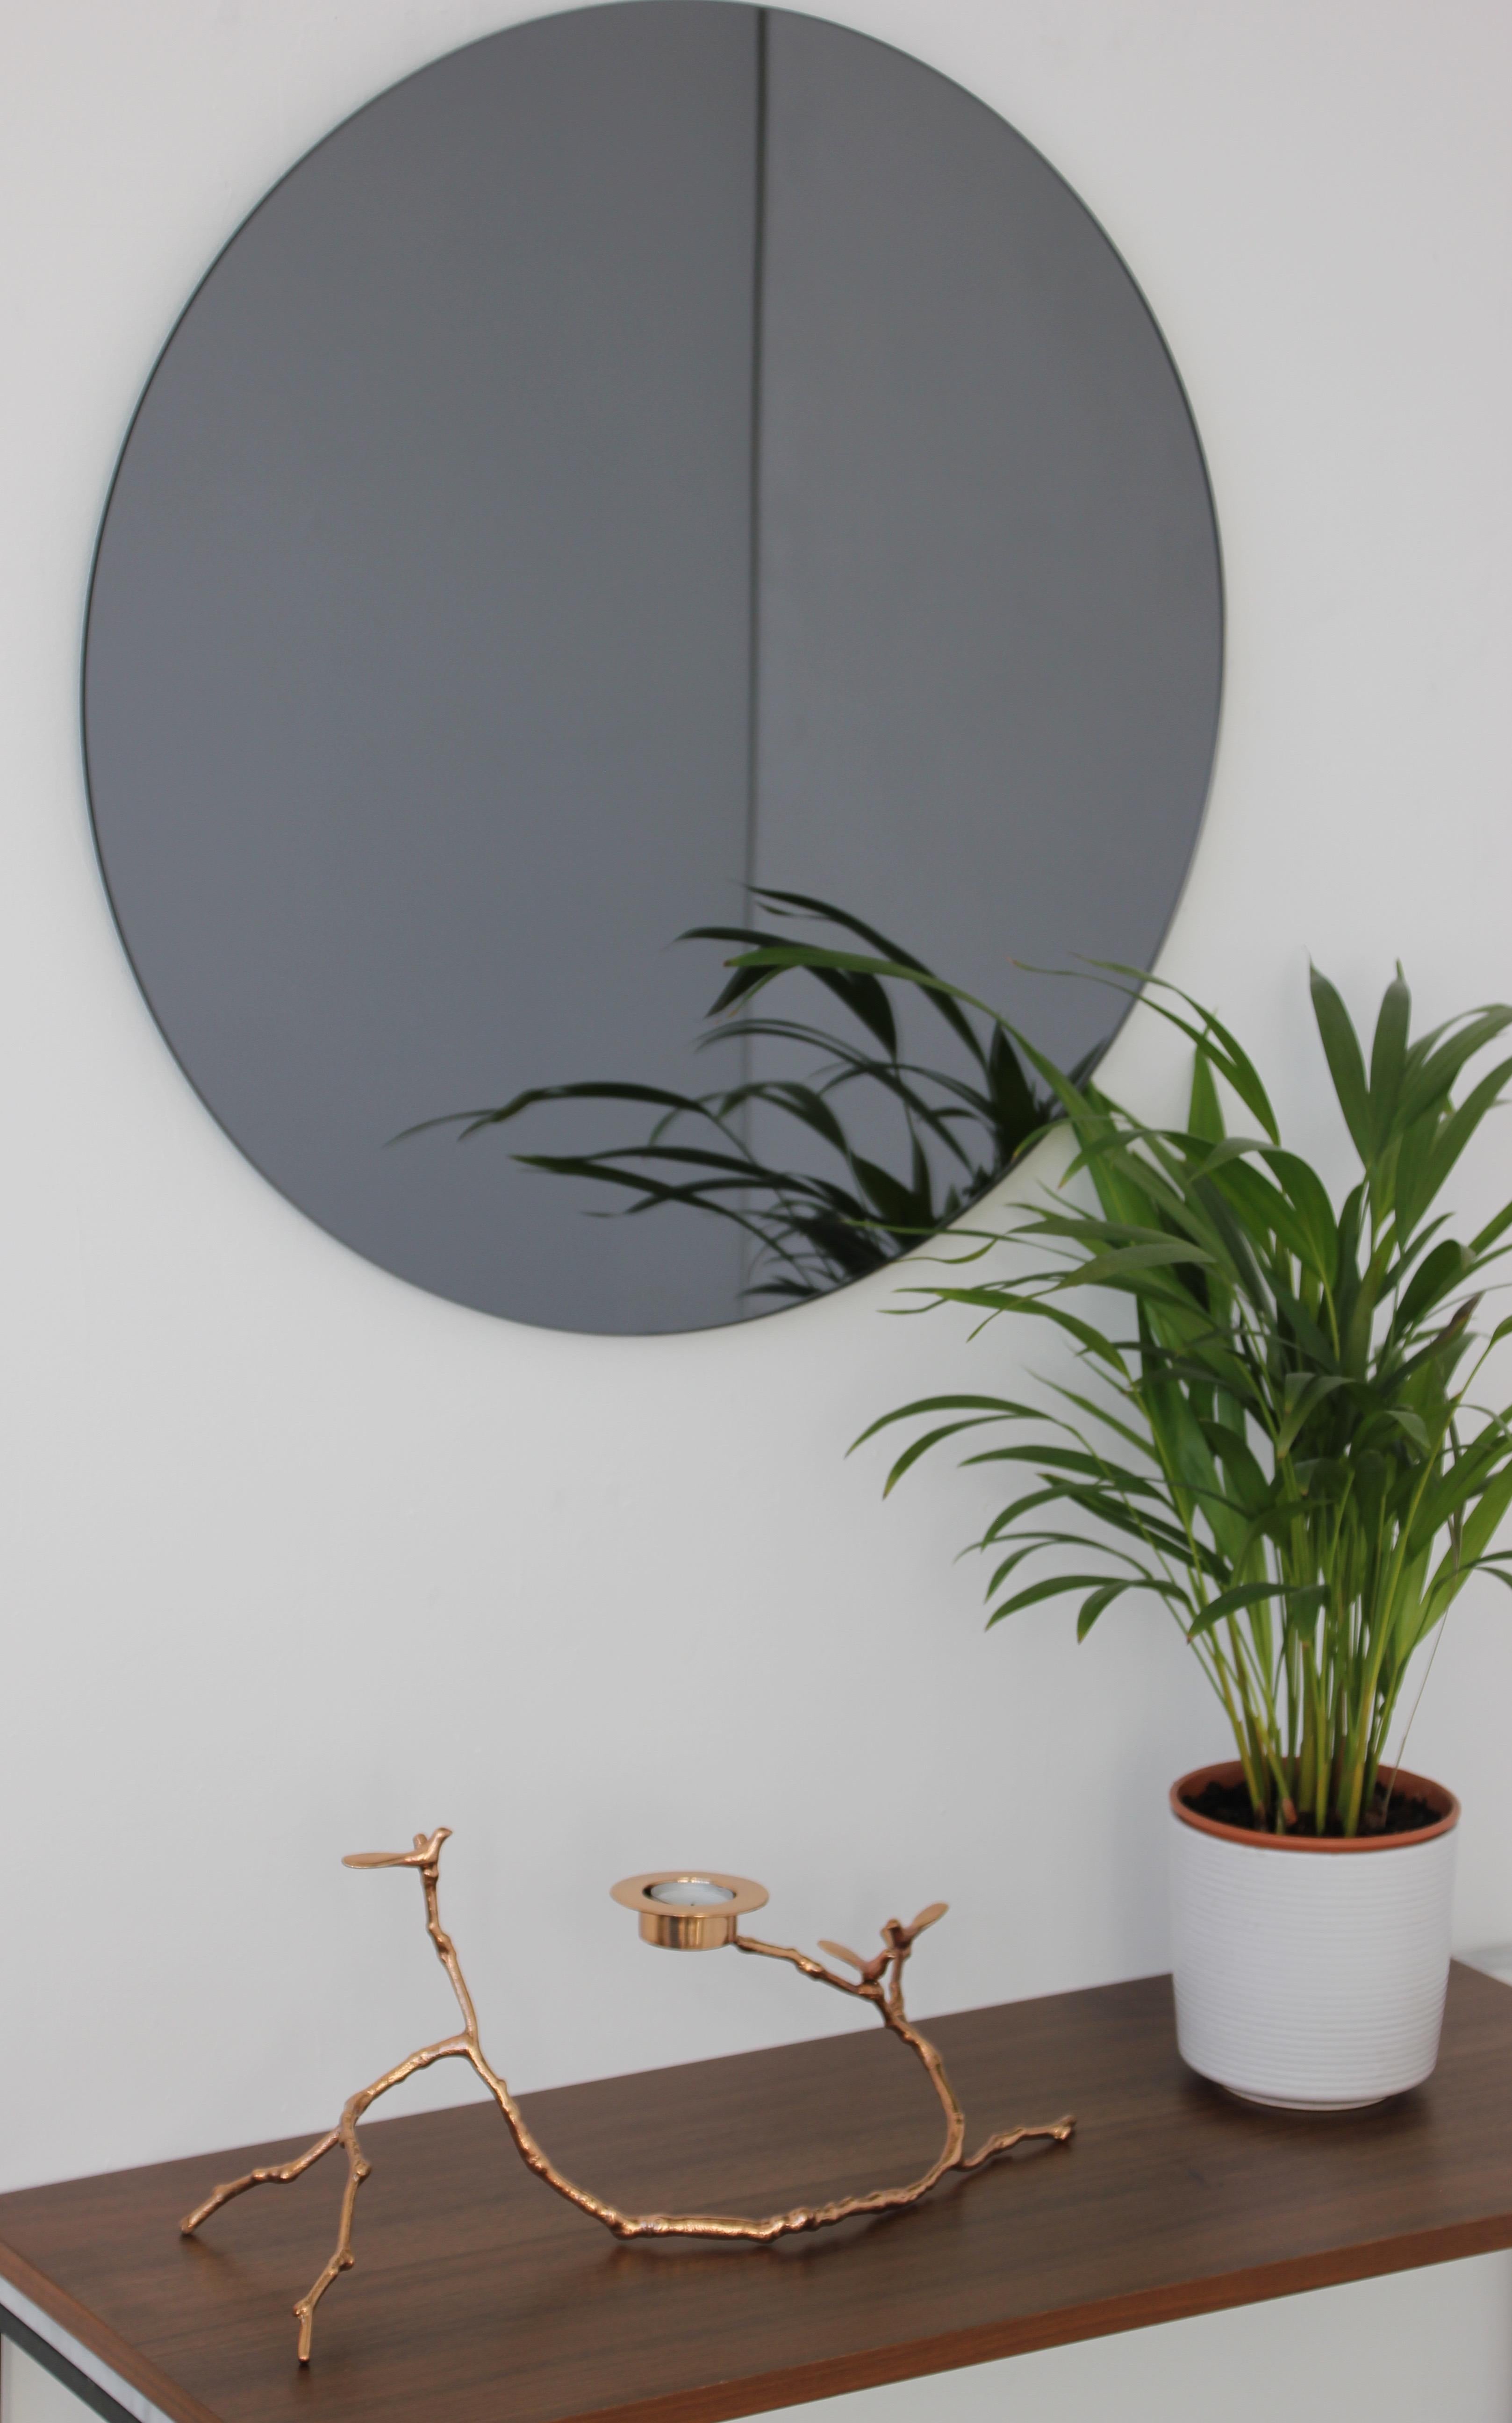 Orbis Black Tinted Round Frameless Contemporary Mirror, Large For Sale 2